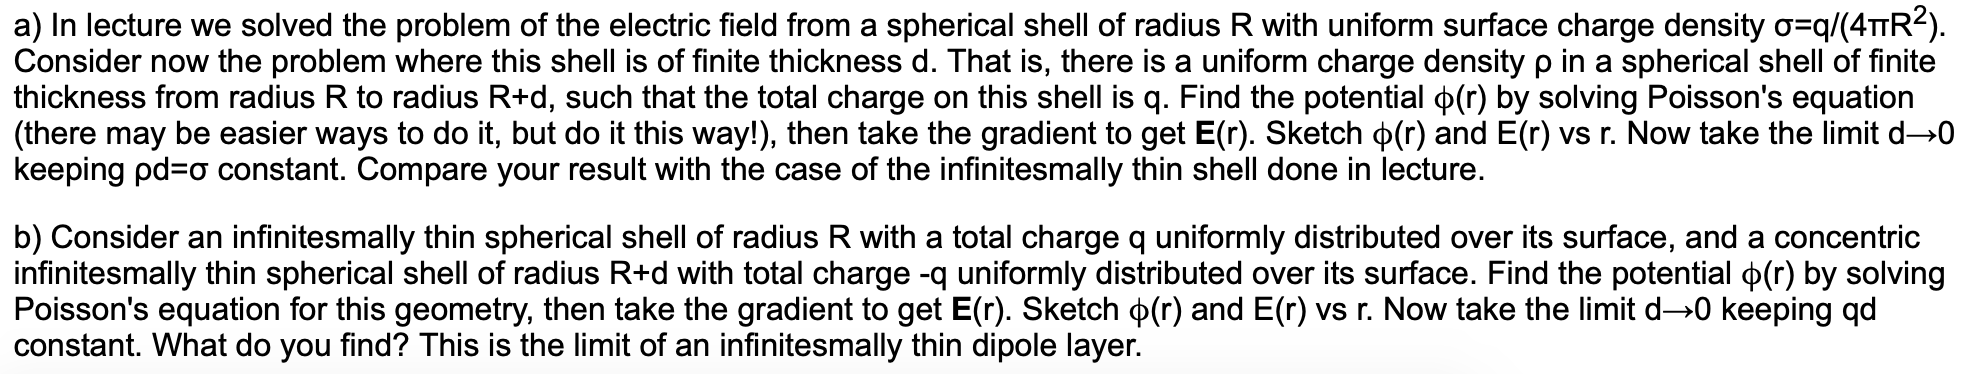 a) In lecture we solved the problem of the electric field from a spherical shell of radius R with uniform surface charge density o q/(4TTR2).
Consider now the problem where this shell is of finite thickness d. That is, there is a uniform charge density p in a spherical shell of finite
thickness from radius R to radius R+d, such that the total charge on this shell is q. Find the potential p(r) by solving Poisson's equation
(there may be easier ways to do it, but do it this way!), then take the gradient to get E(r). Sketch p(r) and E(r) vs r. Now take the limit d-0
keeping pd a constant. Compare your result with the case of the infinitesmally thin shell done in lecture.
b) Consider an infinitesmally thin spherical shell of radius R with a total charge q uniformly distributed over its surface, and a concentric
infinitesmally thin spherical shell of radius R+d with total charge -q uniformly distributed over its surface. Find the potential p(r) by solving
Poisson's equation for this geometry, then take the gradient to get E(r). Sketch p(r) and E(r) vs r. Now take the limit d-0 keeping qd
constant. What do you find? This is the limit of an infinitesmally thin dipole layer.
